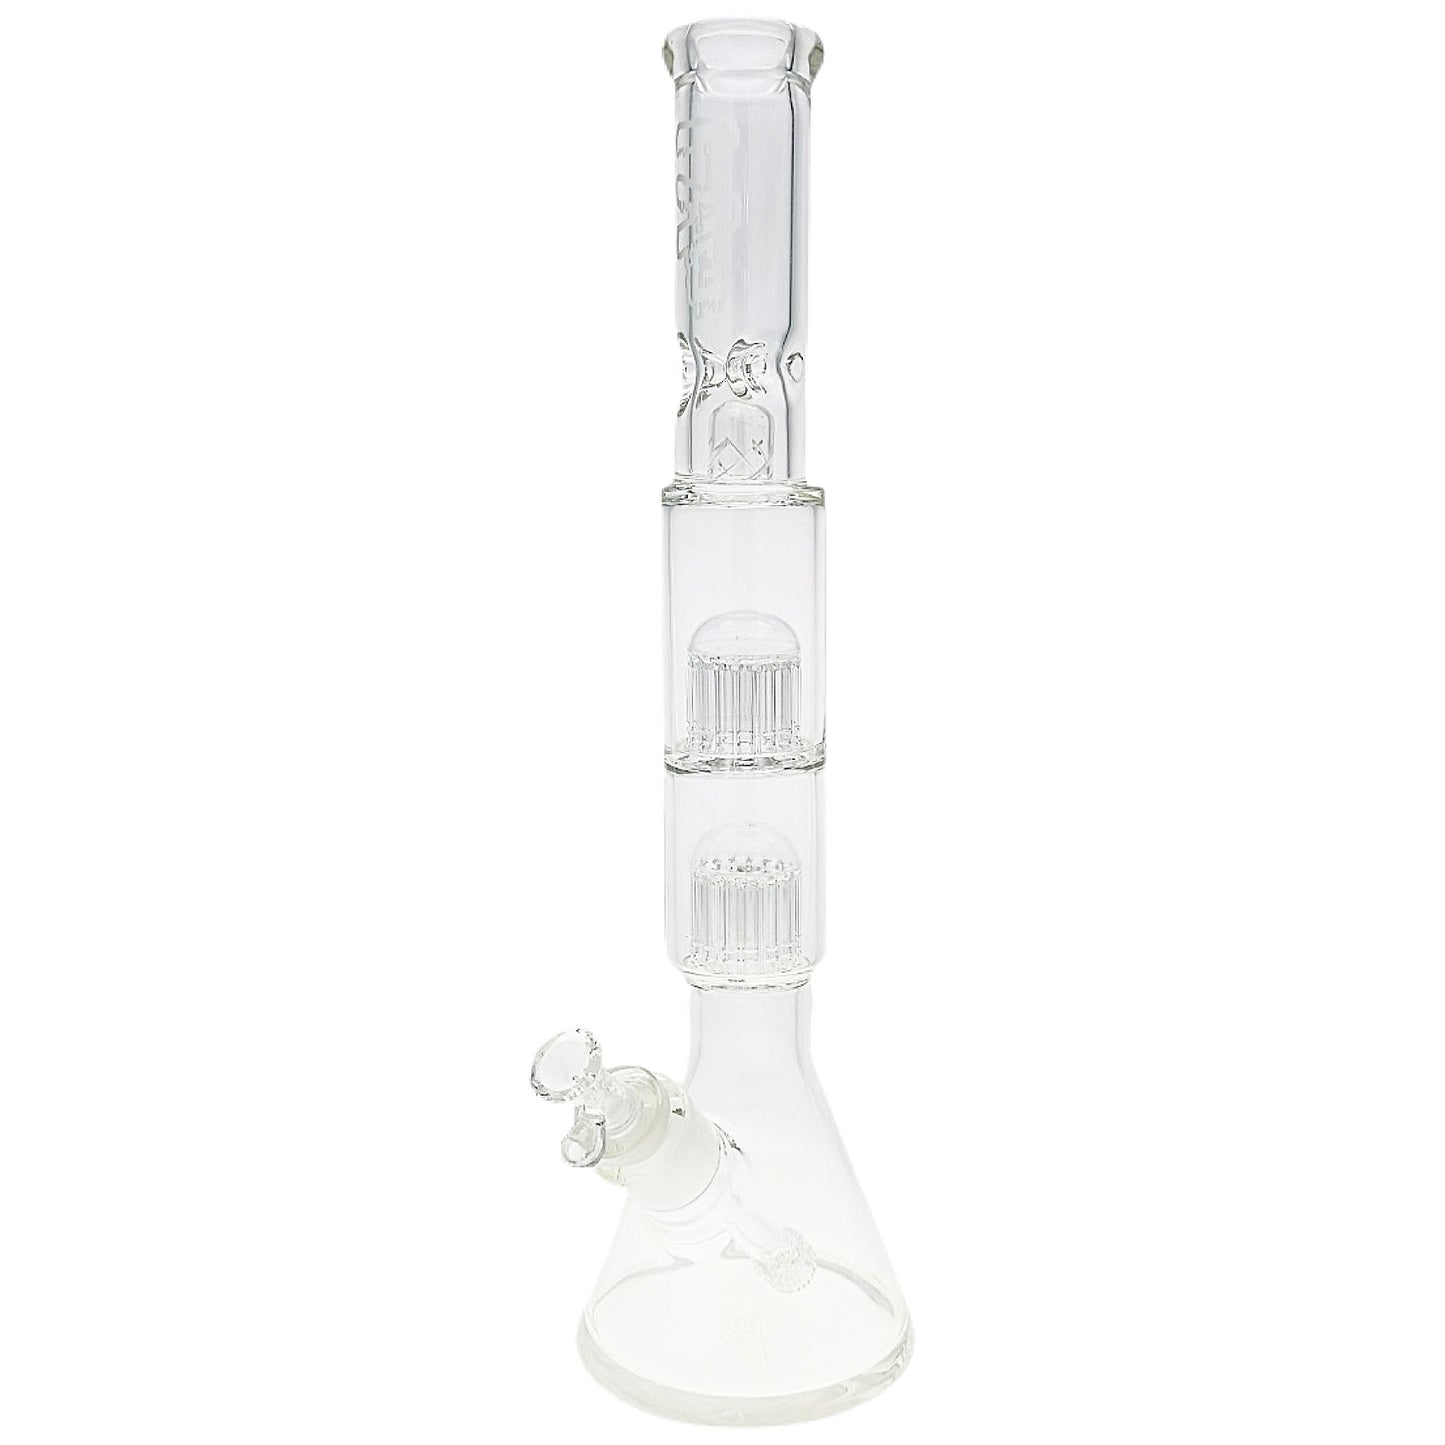 TAG 20” Double Big Tree Perc Beaker Bong by Thick Ass Glass | Mission Dispensary